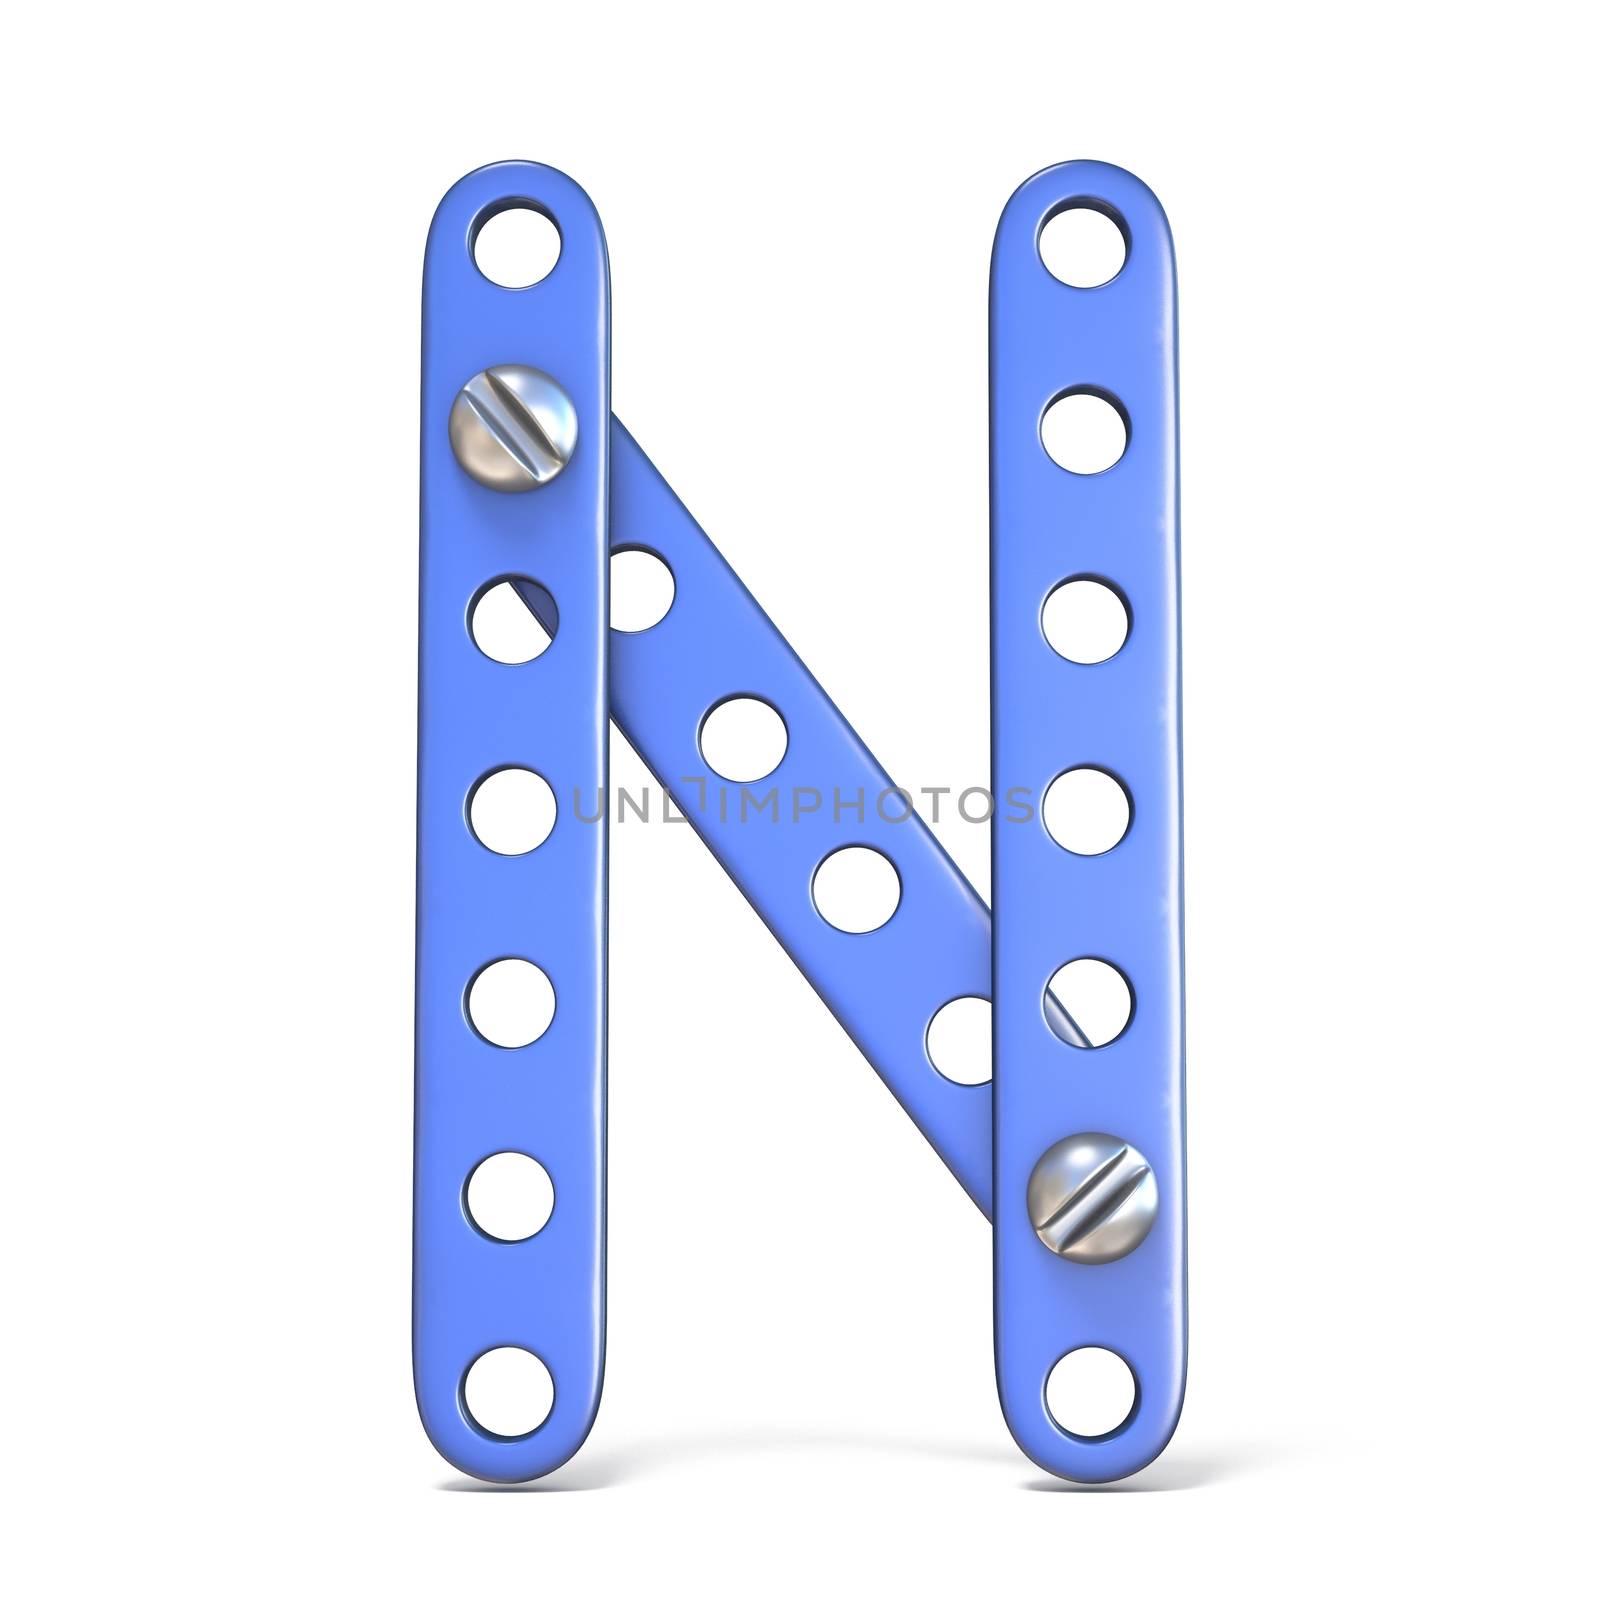 Alphabet made of blue metal constructor toy Letter N 3D render illustration isolated on white background